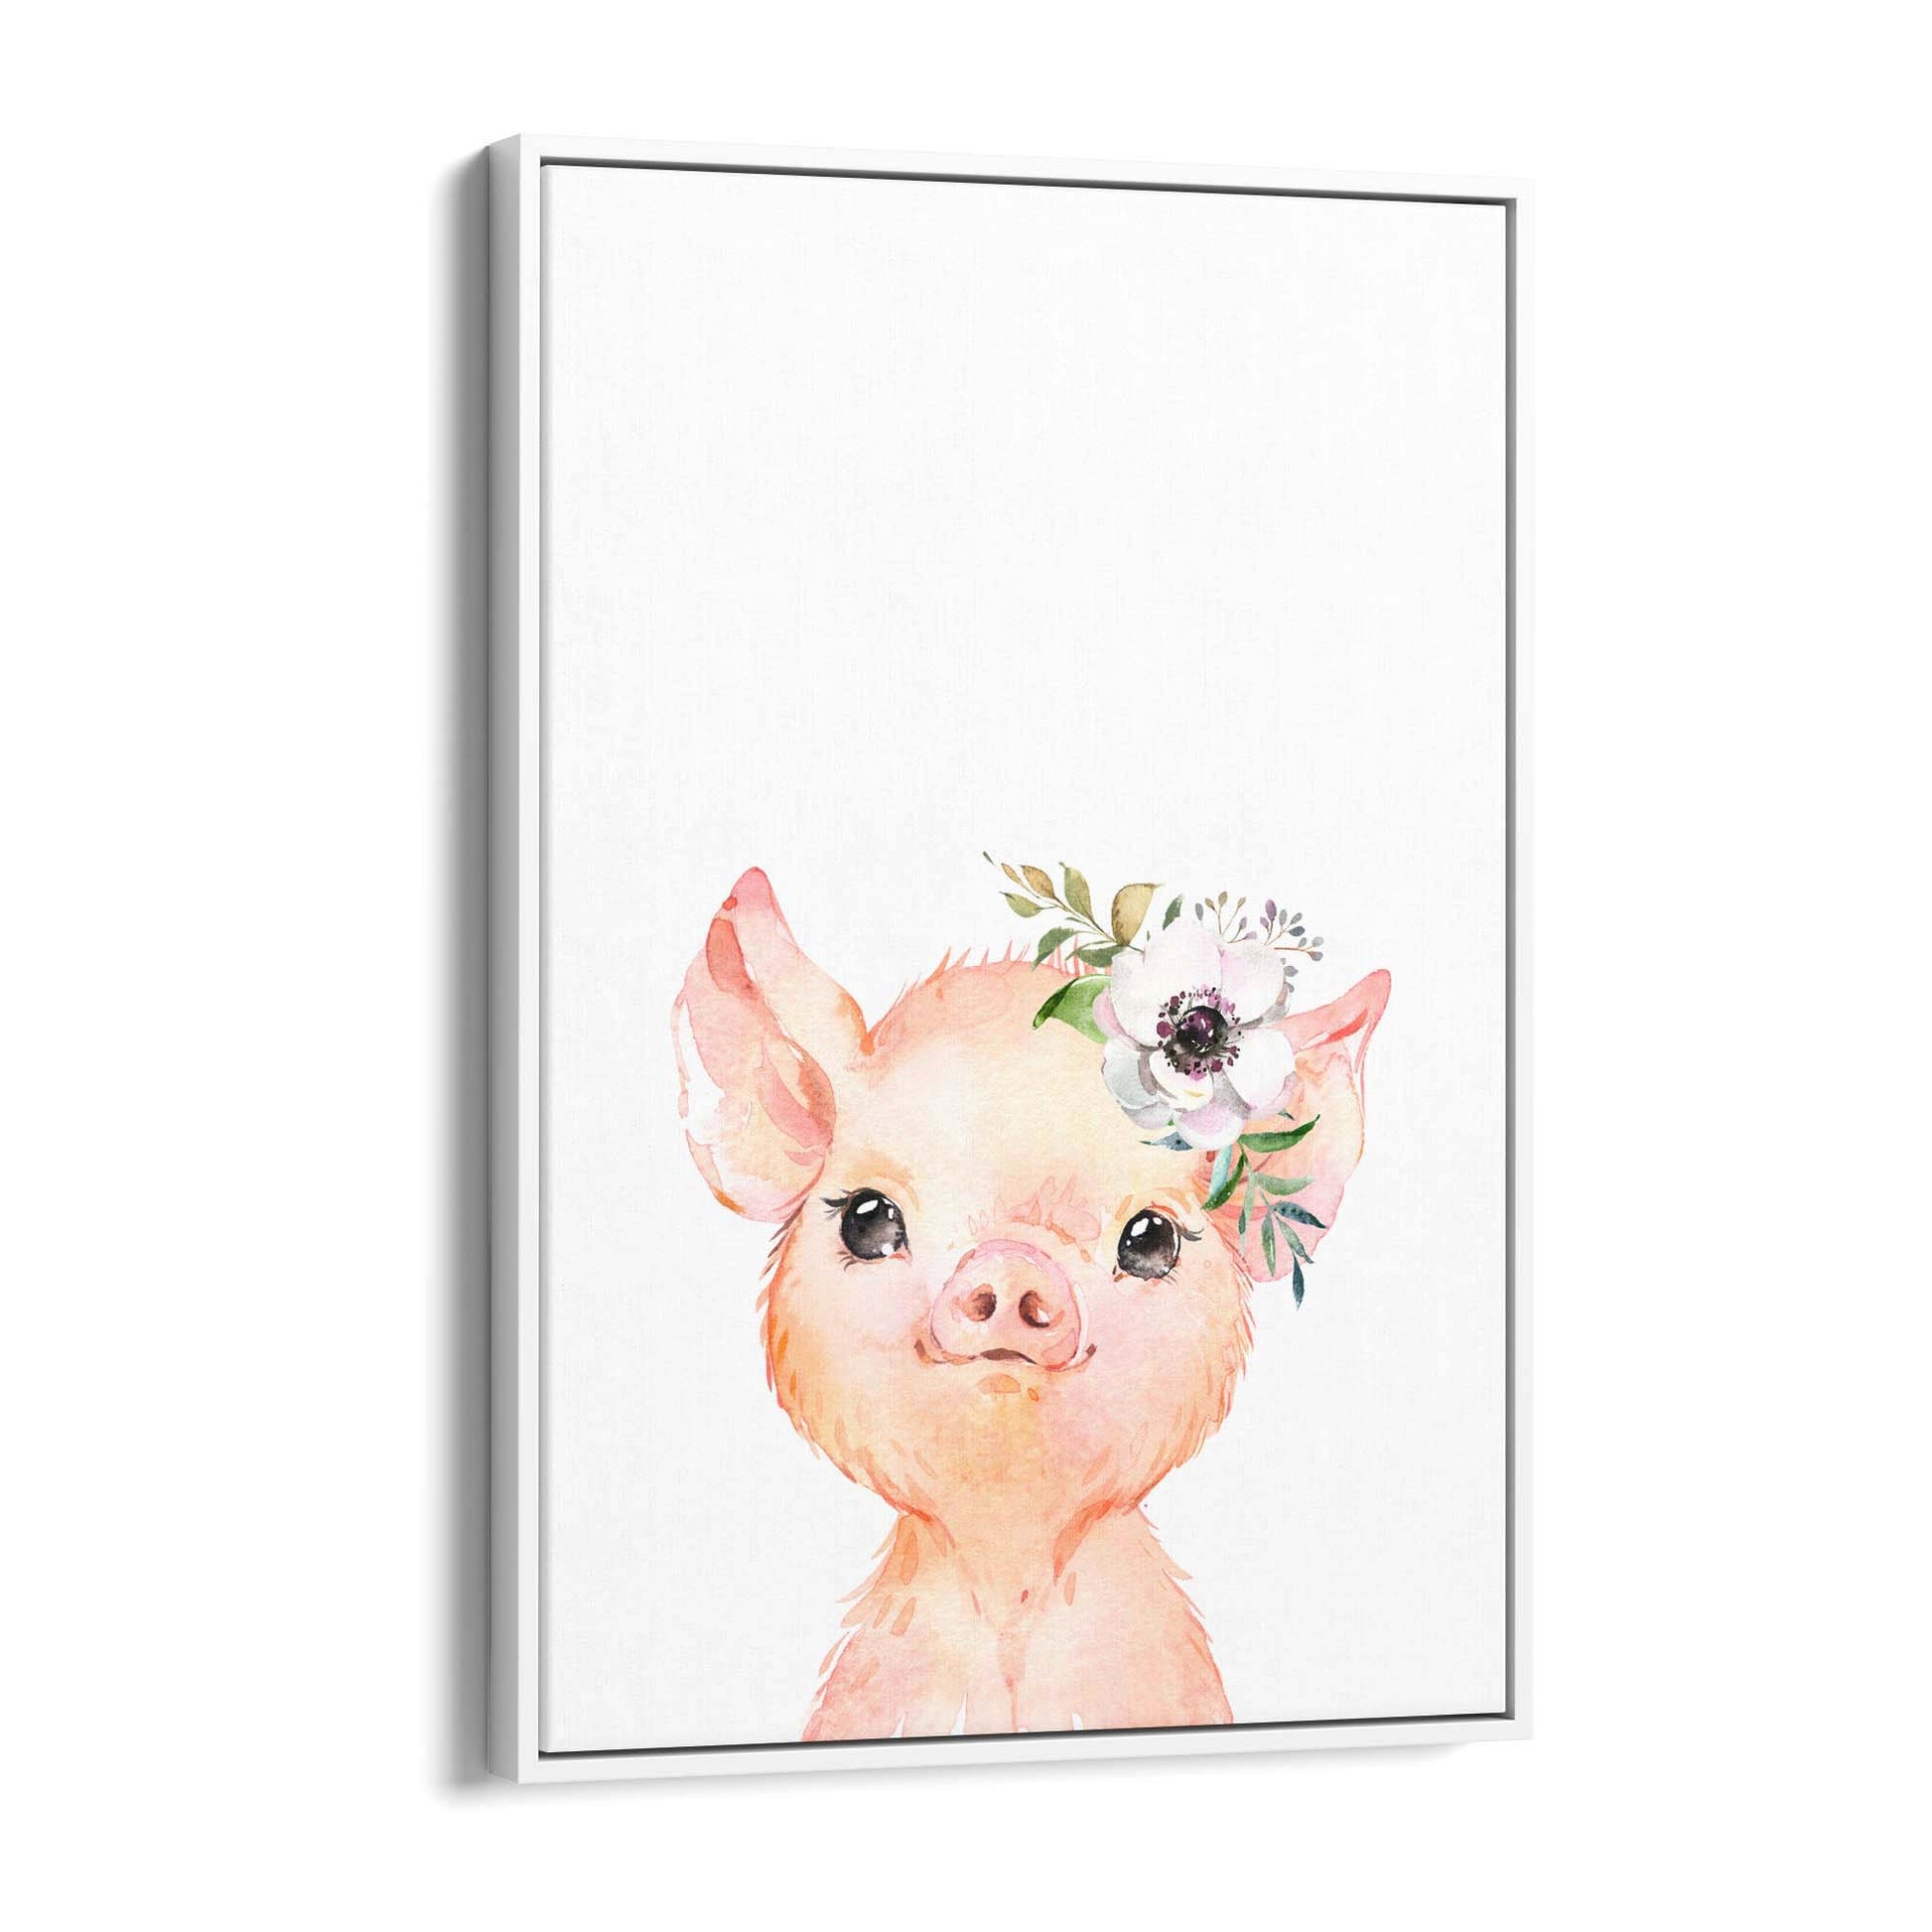 Cute Baby Pig Piglet Nursery Animal Gift Wall Art #1 - The Affordable Art Company